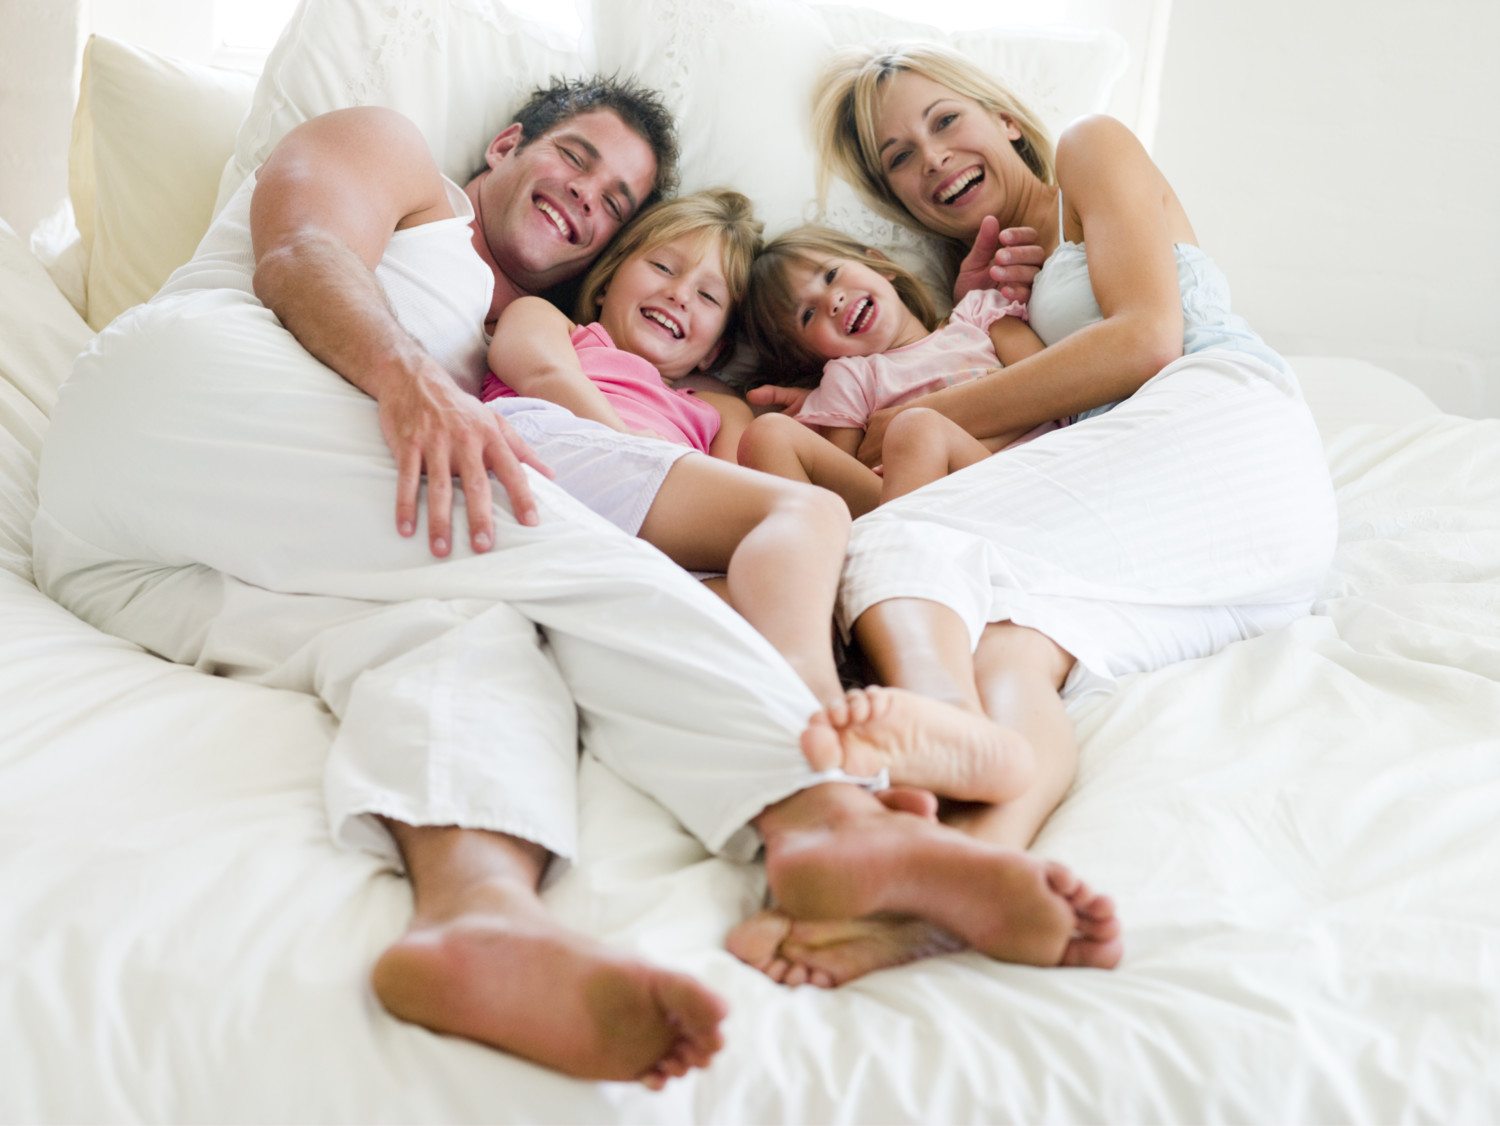 giant mattresses for family co-sleeping simplemost